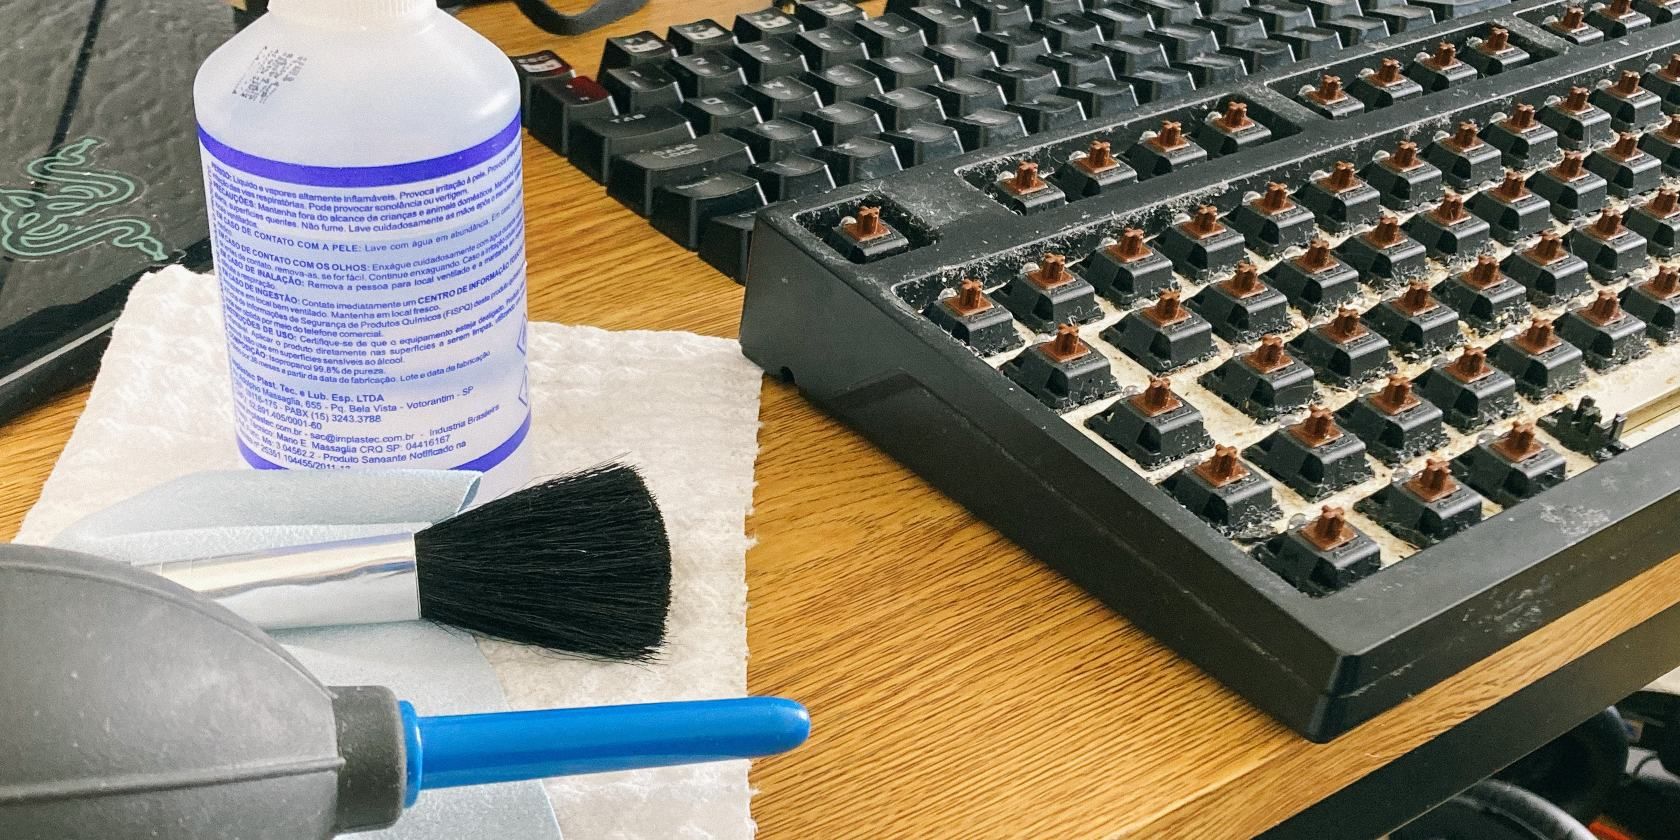 a dirty keyboard being cleaned